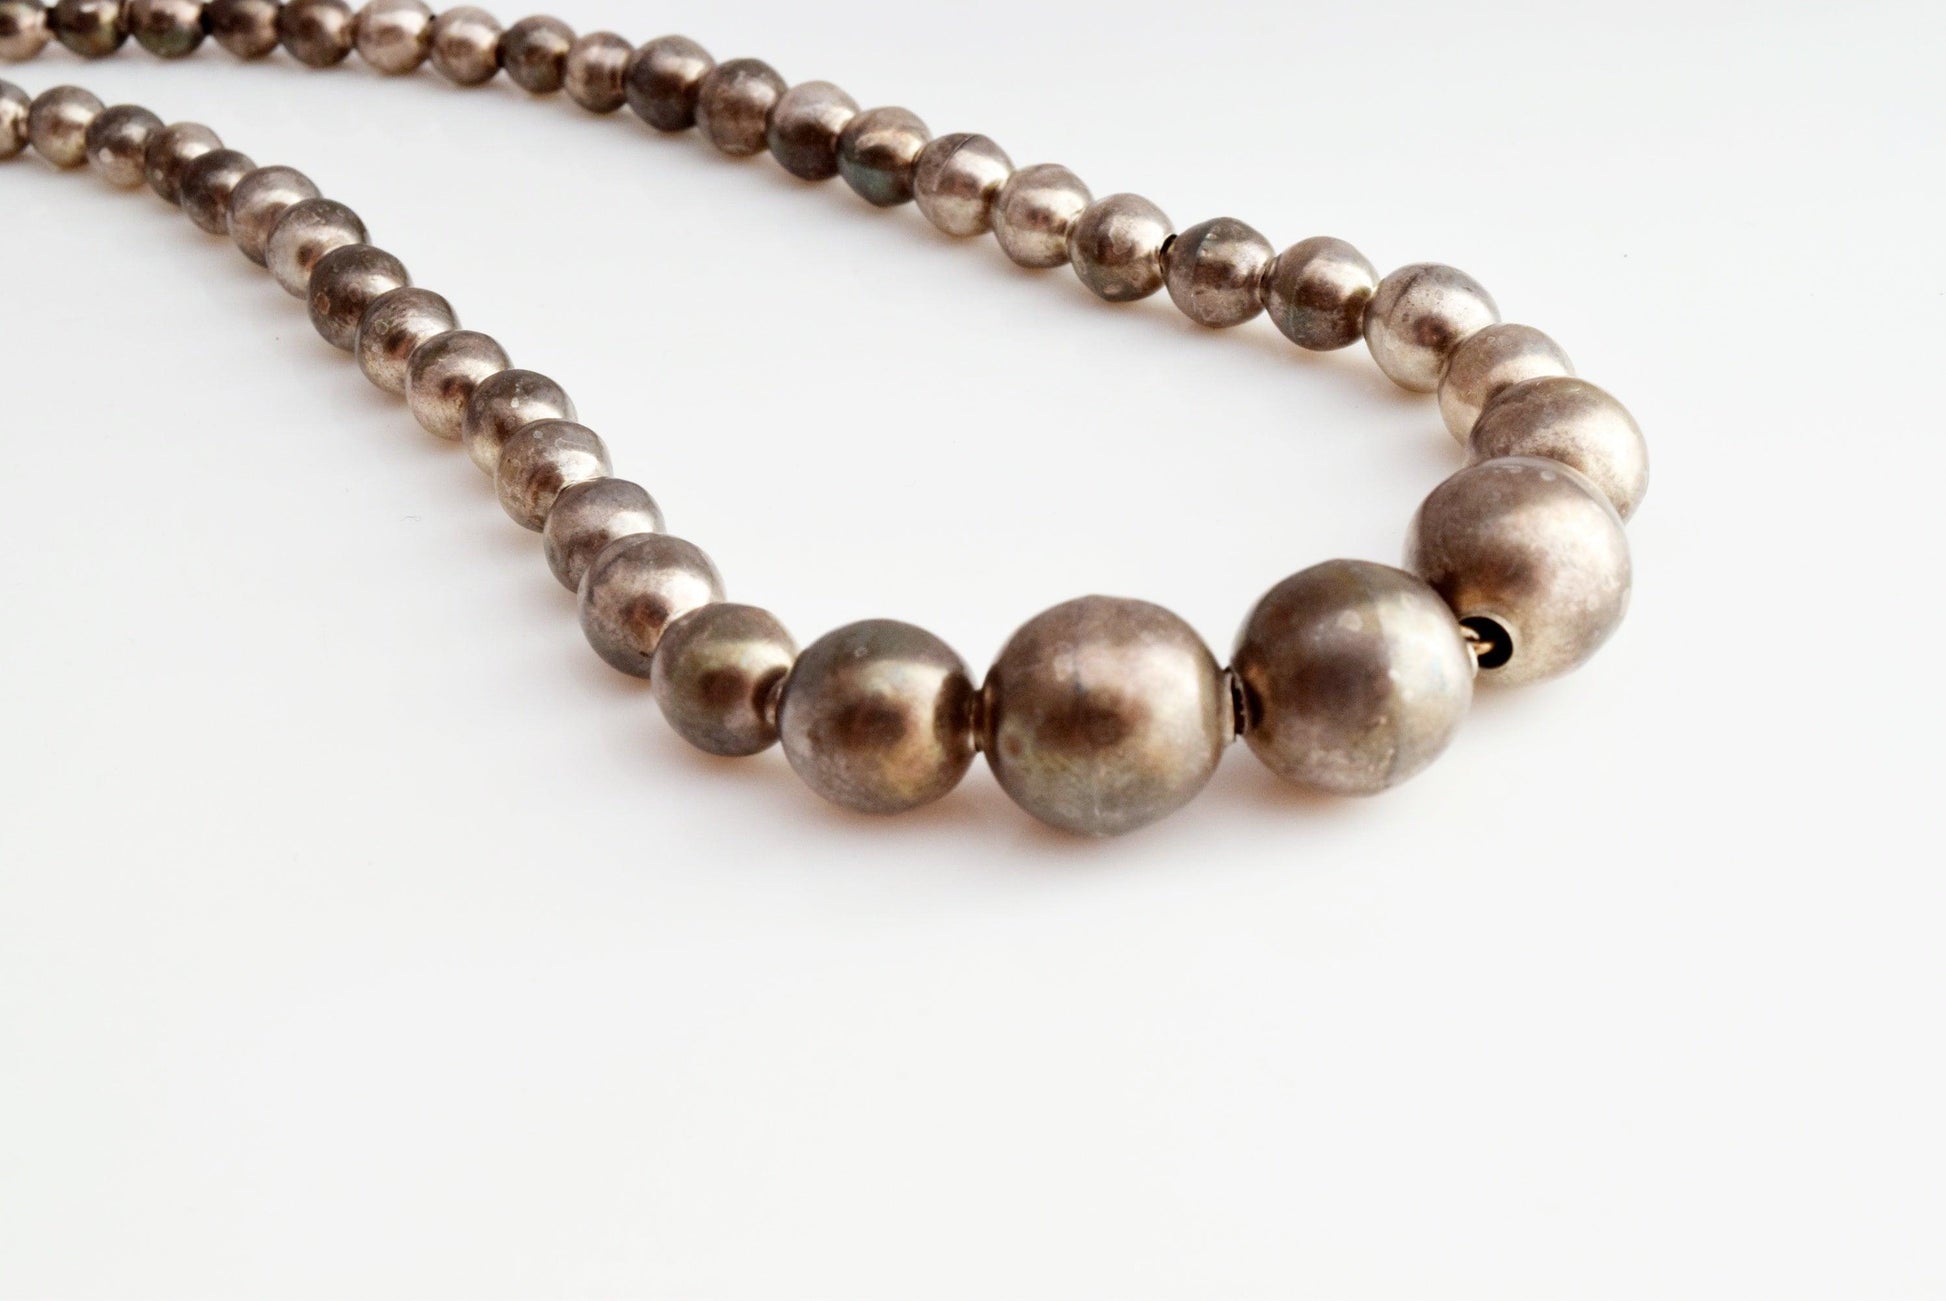 Vintage Silver Ball Necklace from Iguala, Mexico - Anteeka